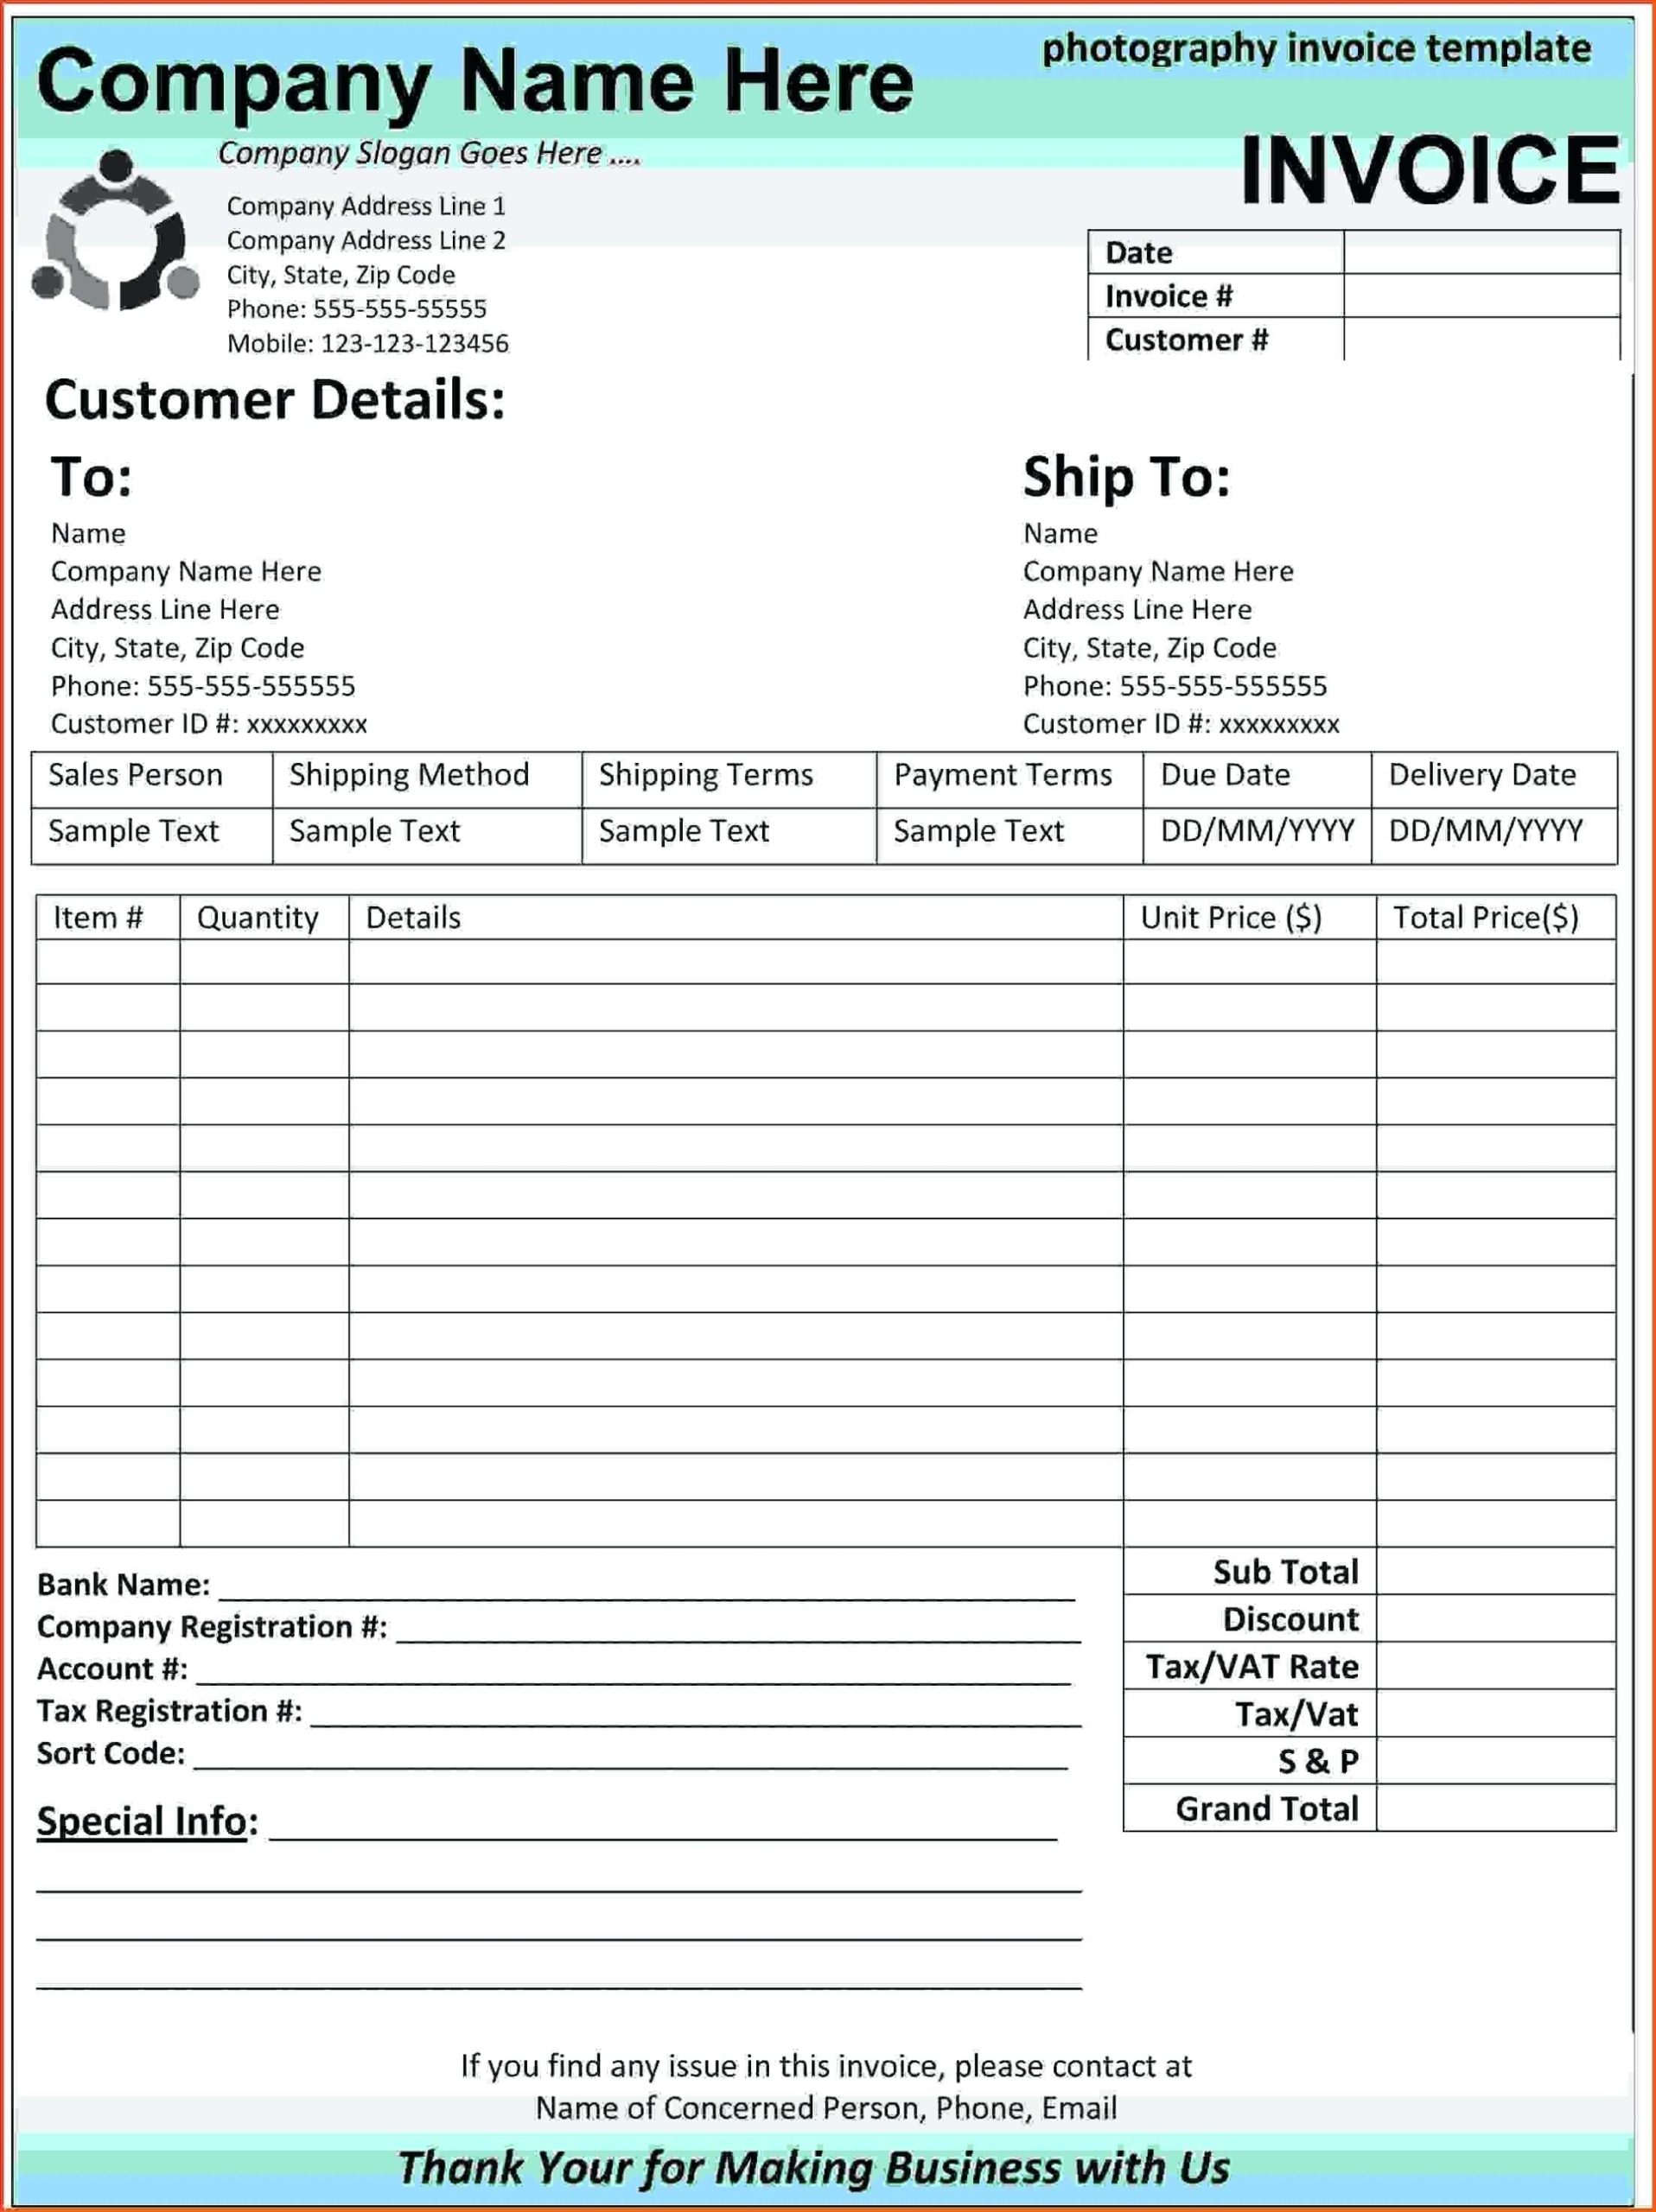 Invoice Template For It Consulting Services - Cards Design Templates throughout Make Your Own Invoice Template Free